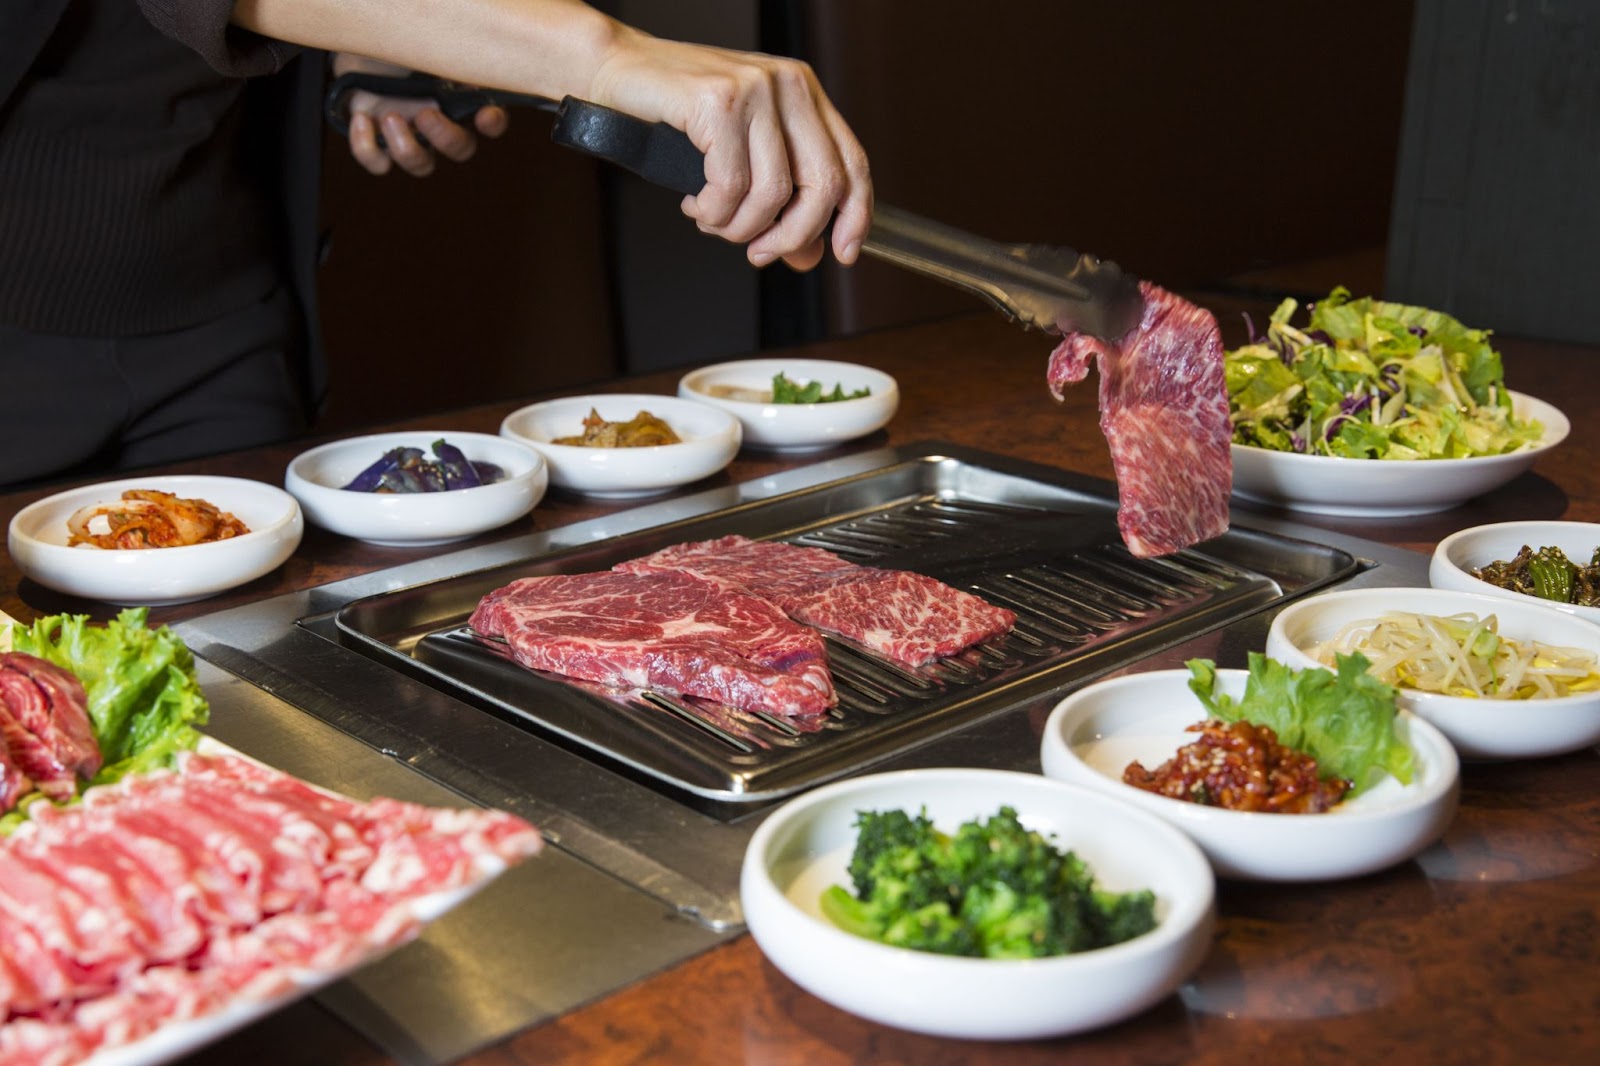 A person holding a cut of beef above a Korean BBQ while two other cuts of beef are cooking. The BBQ is surrounded by various side dishes as well as additional cuts of pork.